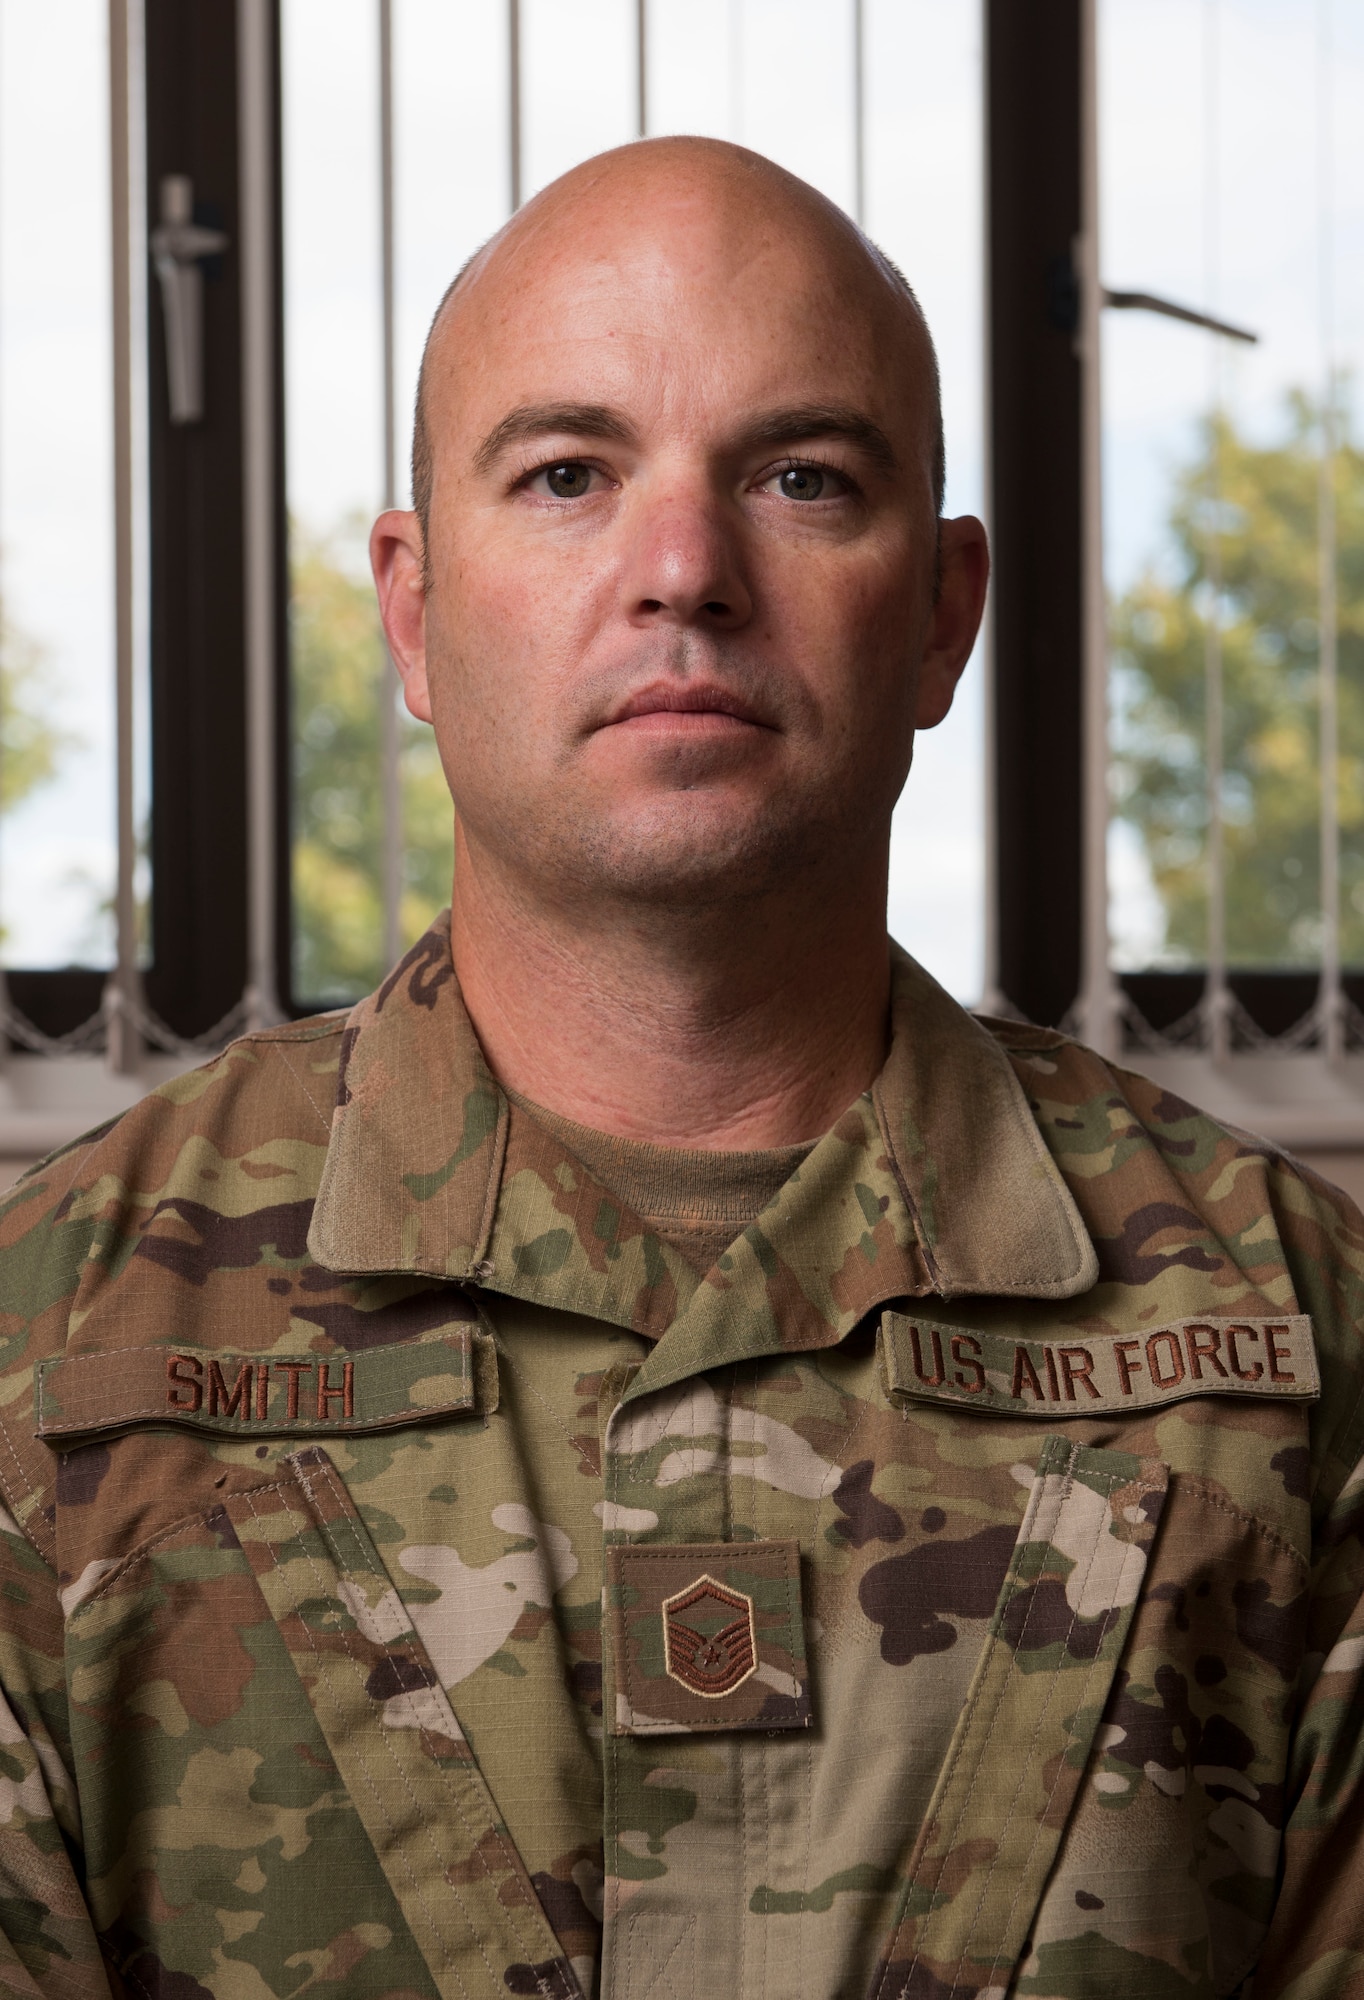 U.S. Air Force Master Sgt Ralph Smith, 509th Logistics Readiness Squadron fuel supervisor, deployed from Whiteman Air Force Base, Missouri, poses for a photo at RAF Fairford, England, September 5, 2019. Smith supported the mission at RAF Fairford through fuel maintenance on the B-2 Spirit and other aircraft. (U.S. Air Force photo by Airman 1st Class Jennifer Zima)